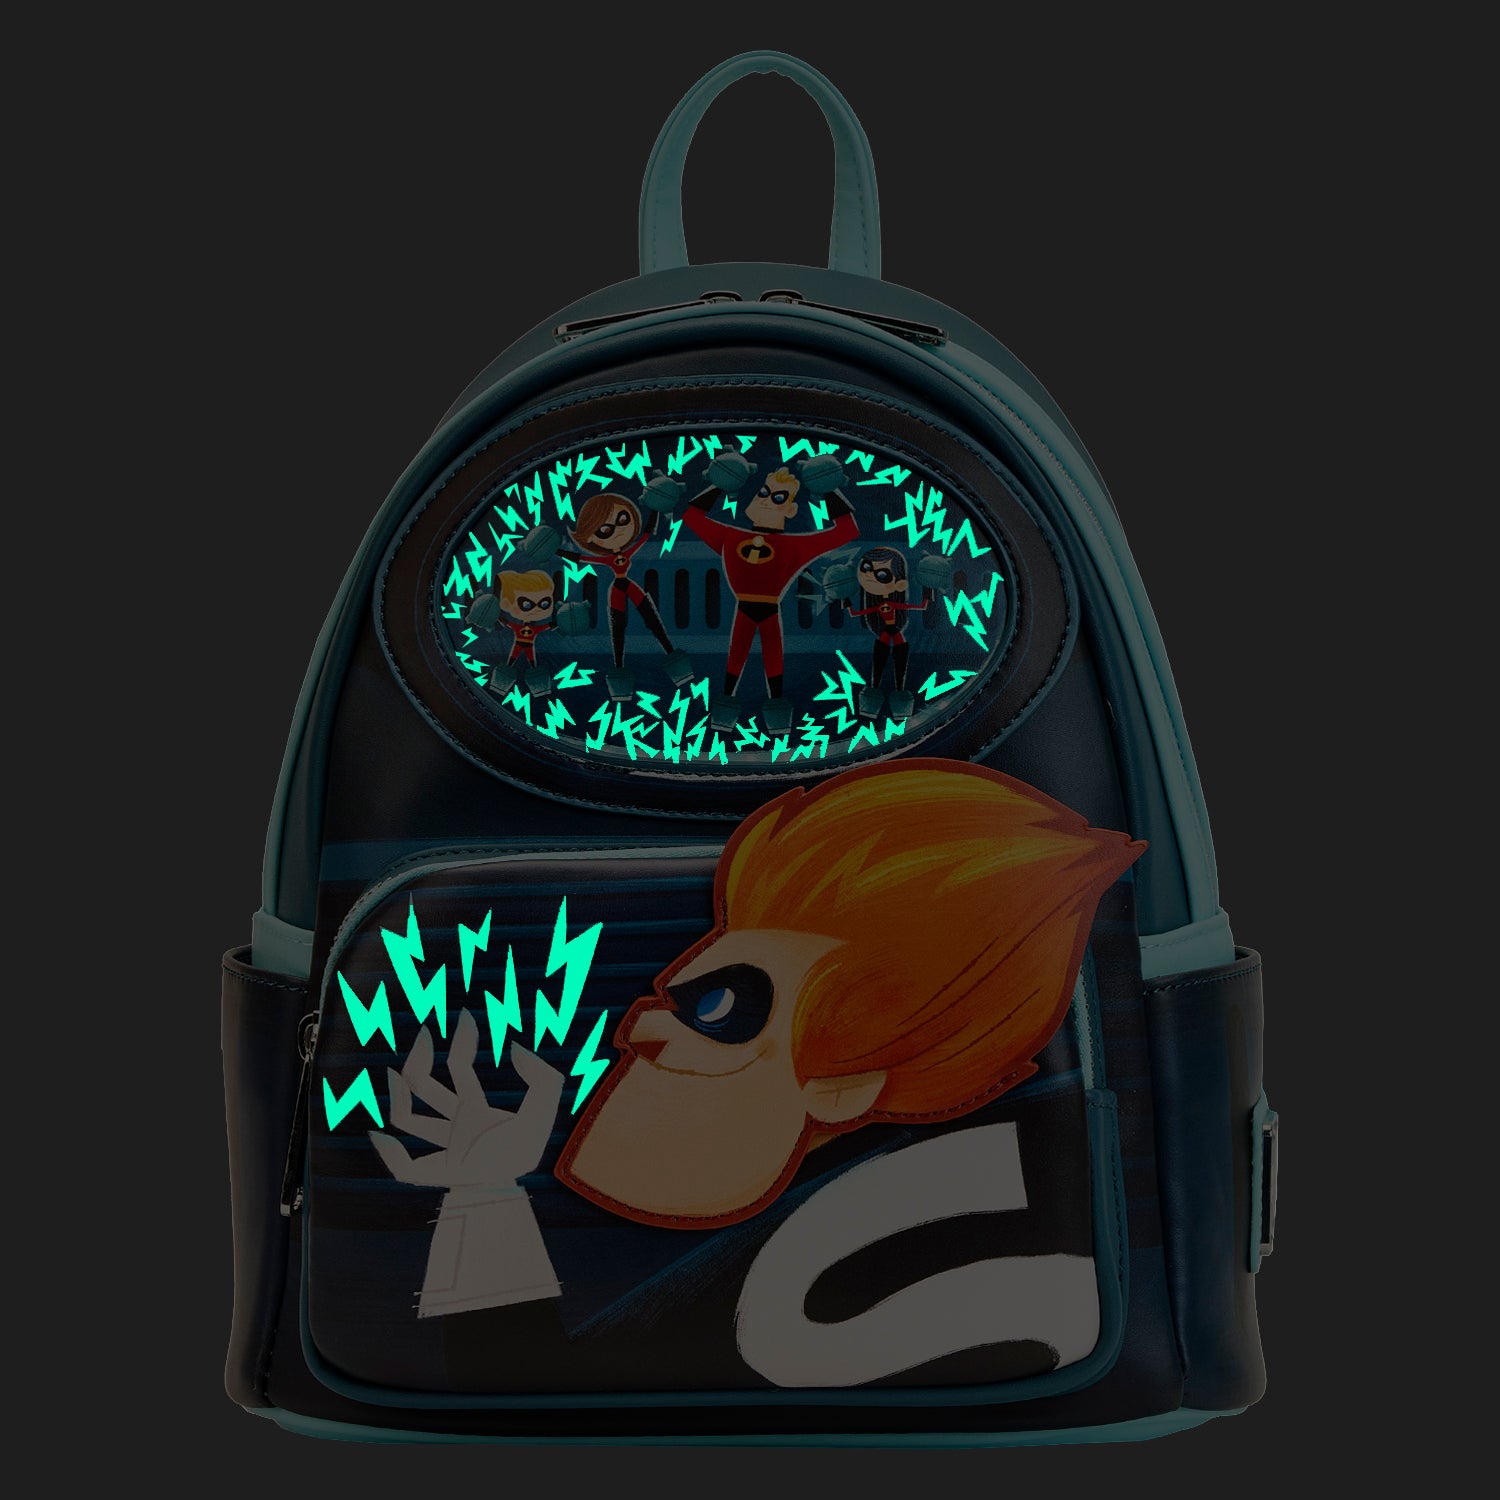 Pixar | Incredibles Moment Syndrome Mini Backpack